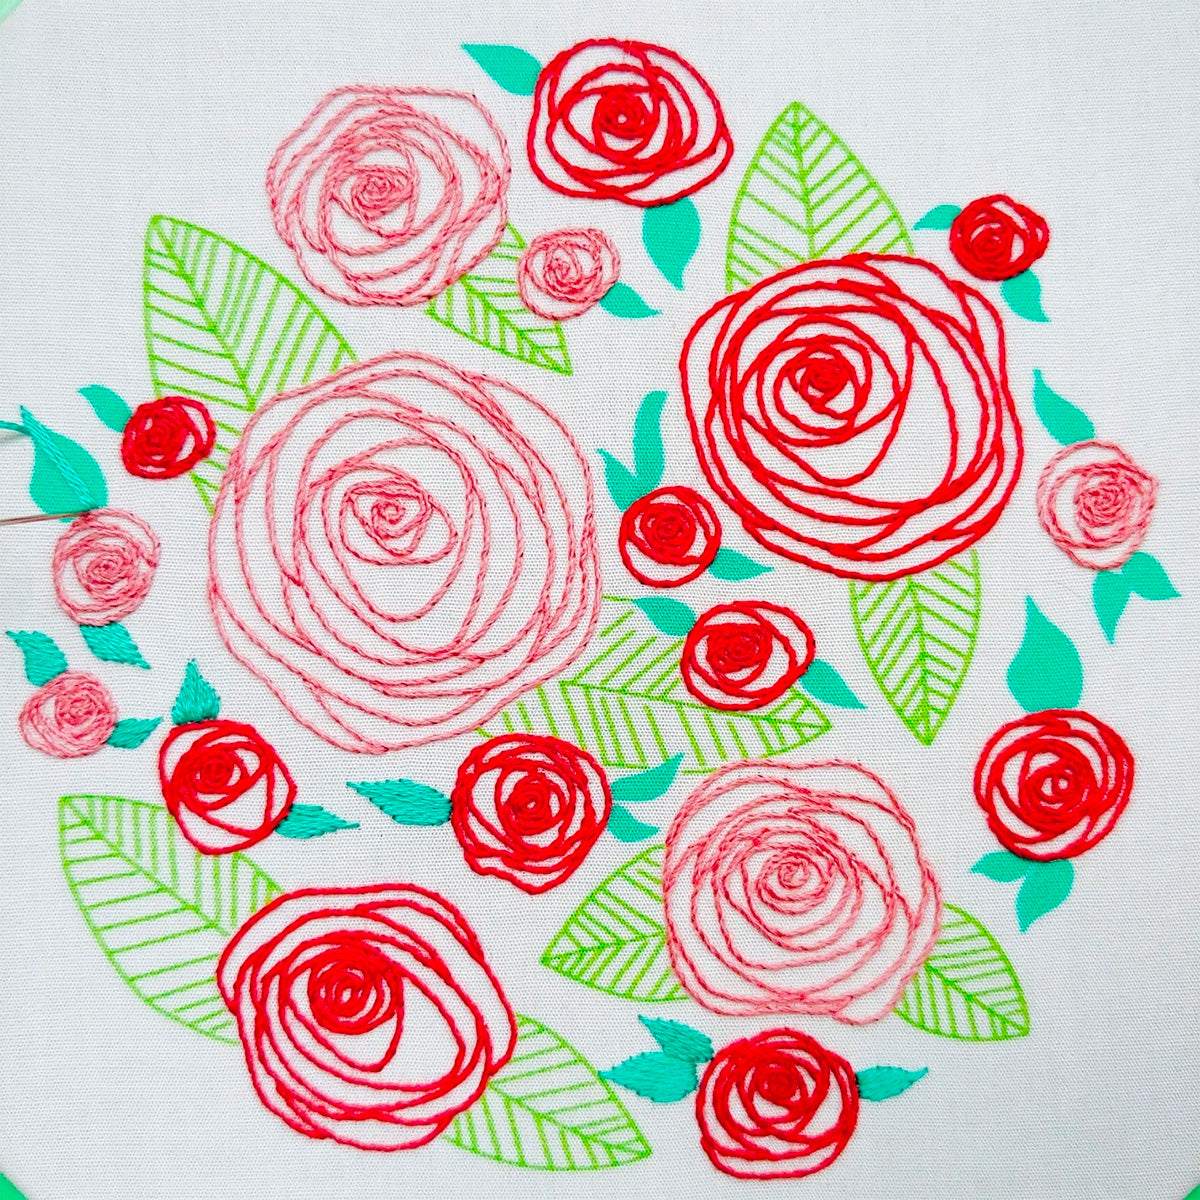 The Rosy Kit Full Hand Embroidery Kit 